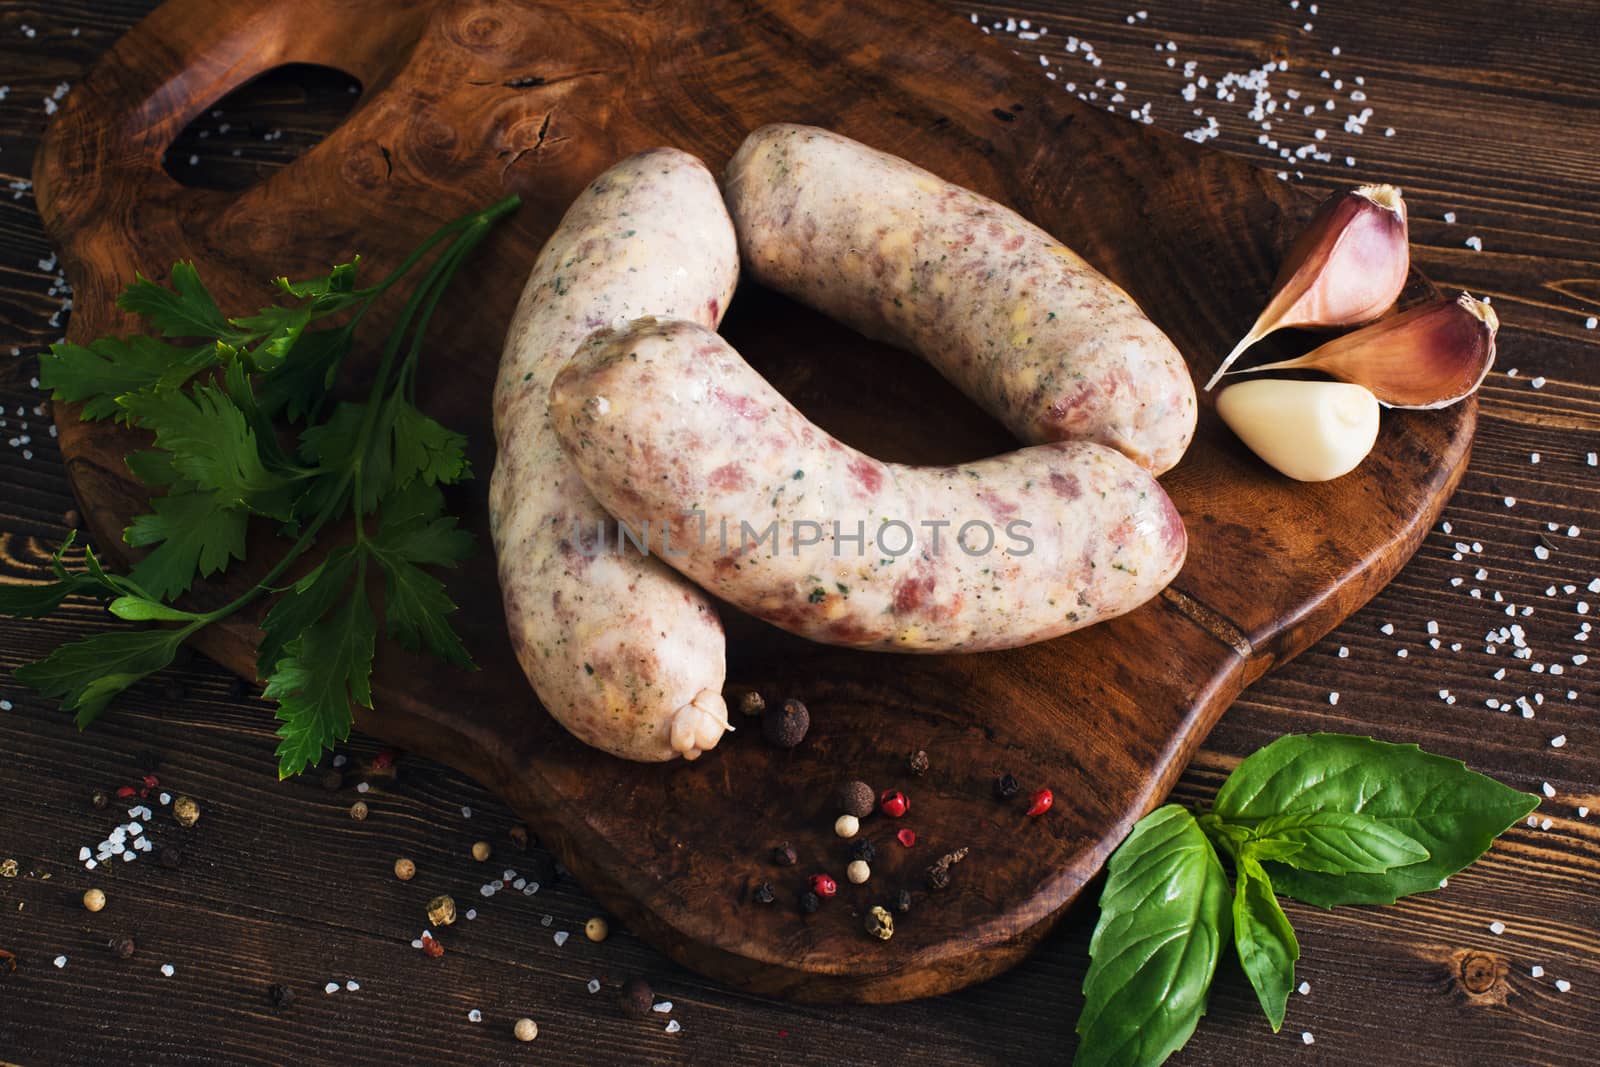 Raw sausages with garlic and parsley by kzen